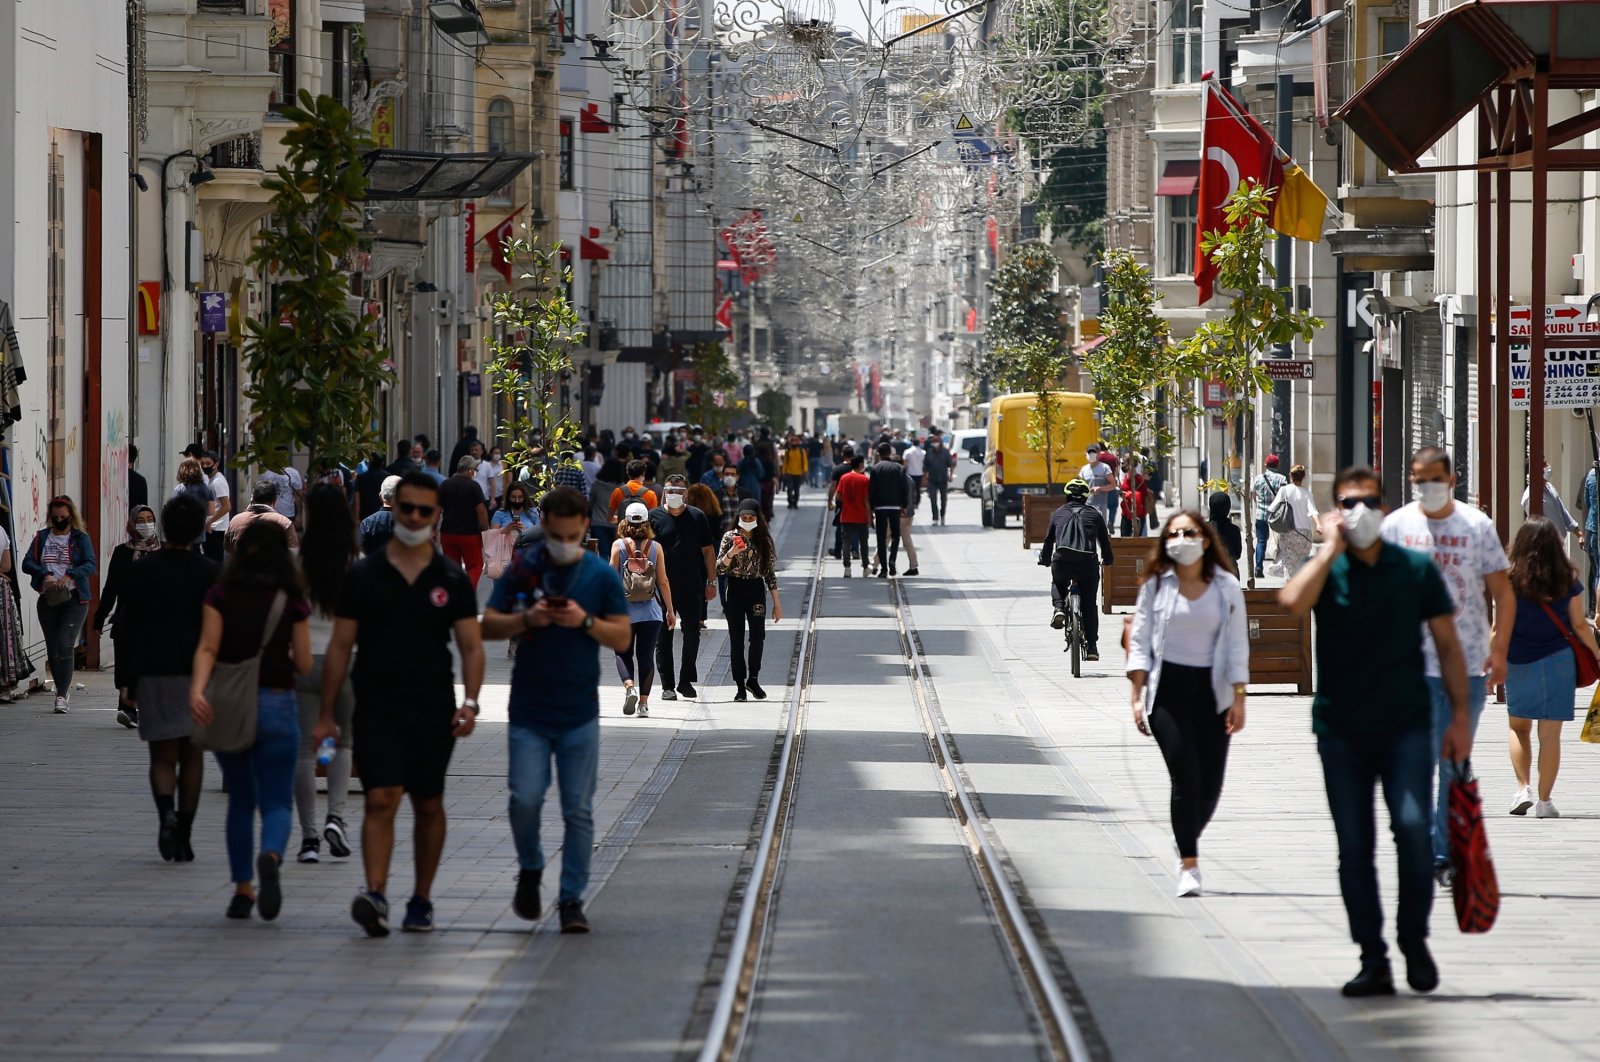 People walk on Istiklal Avenue, one of the main shopping streets in Istanbul, Turkey, during the coronavirus outbreak, May 15, 2020. (AP Photo)